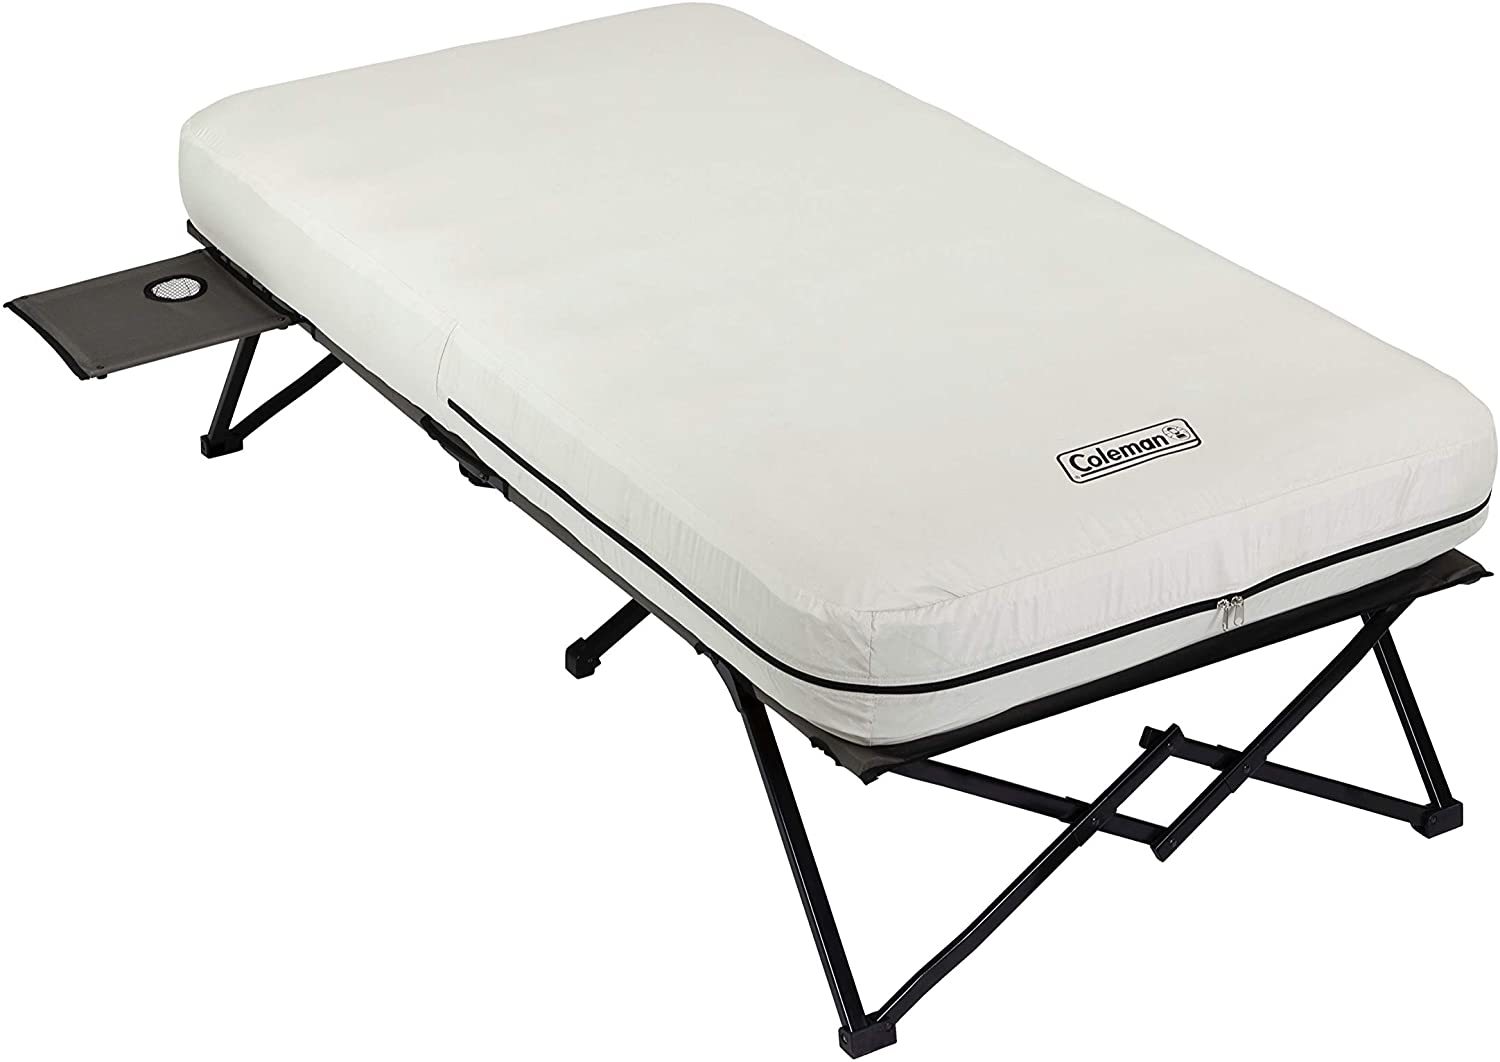 Coleman Airbed Cot Review